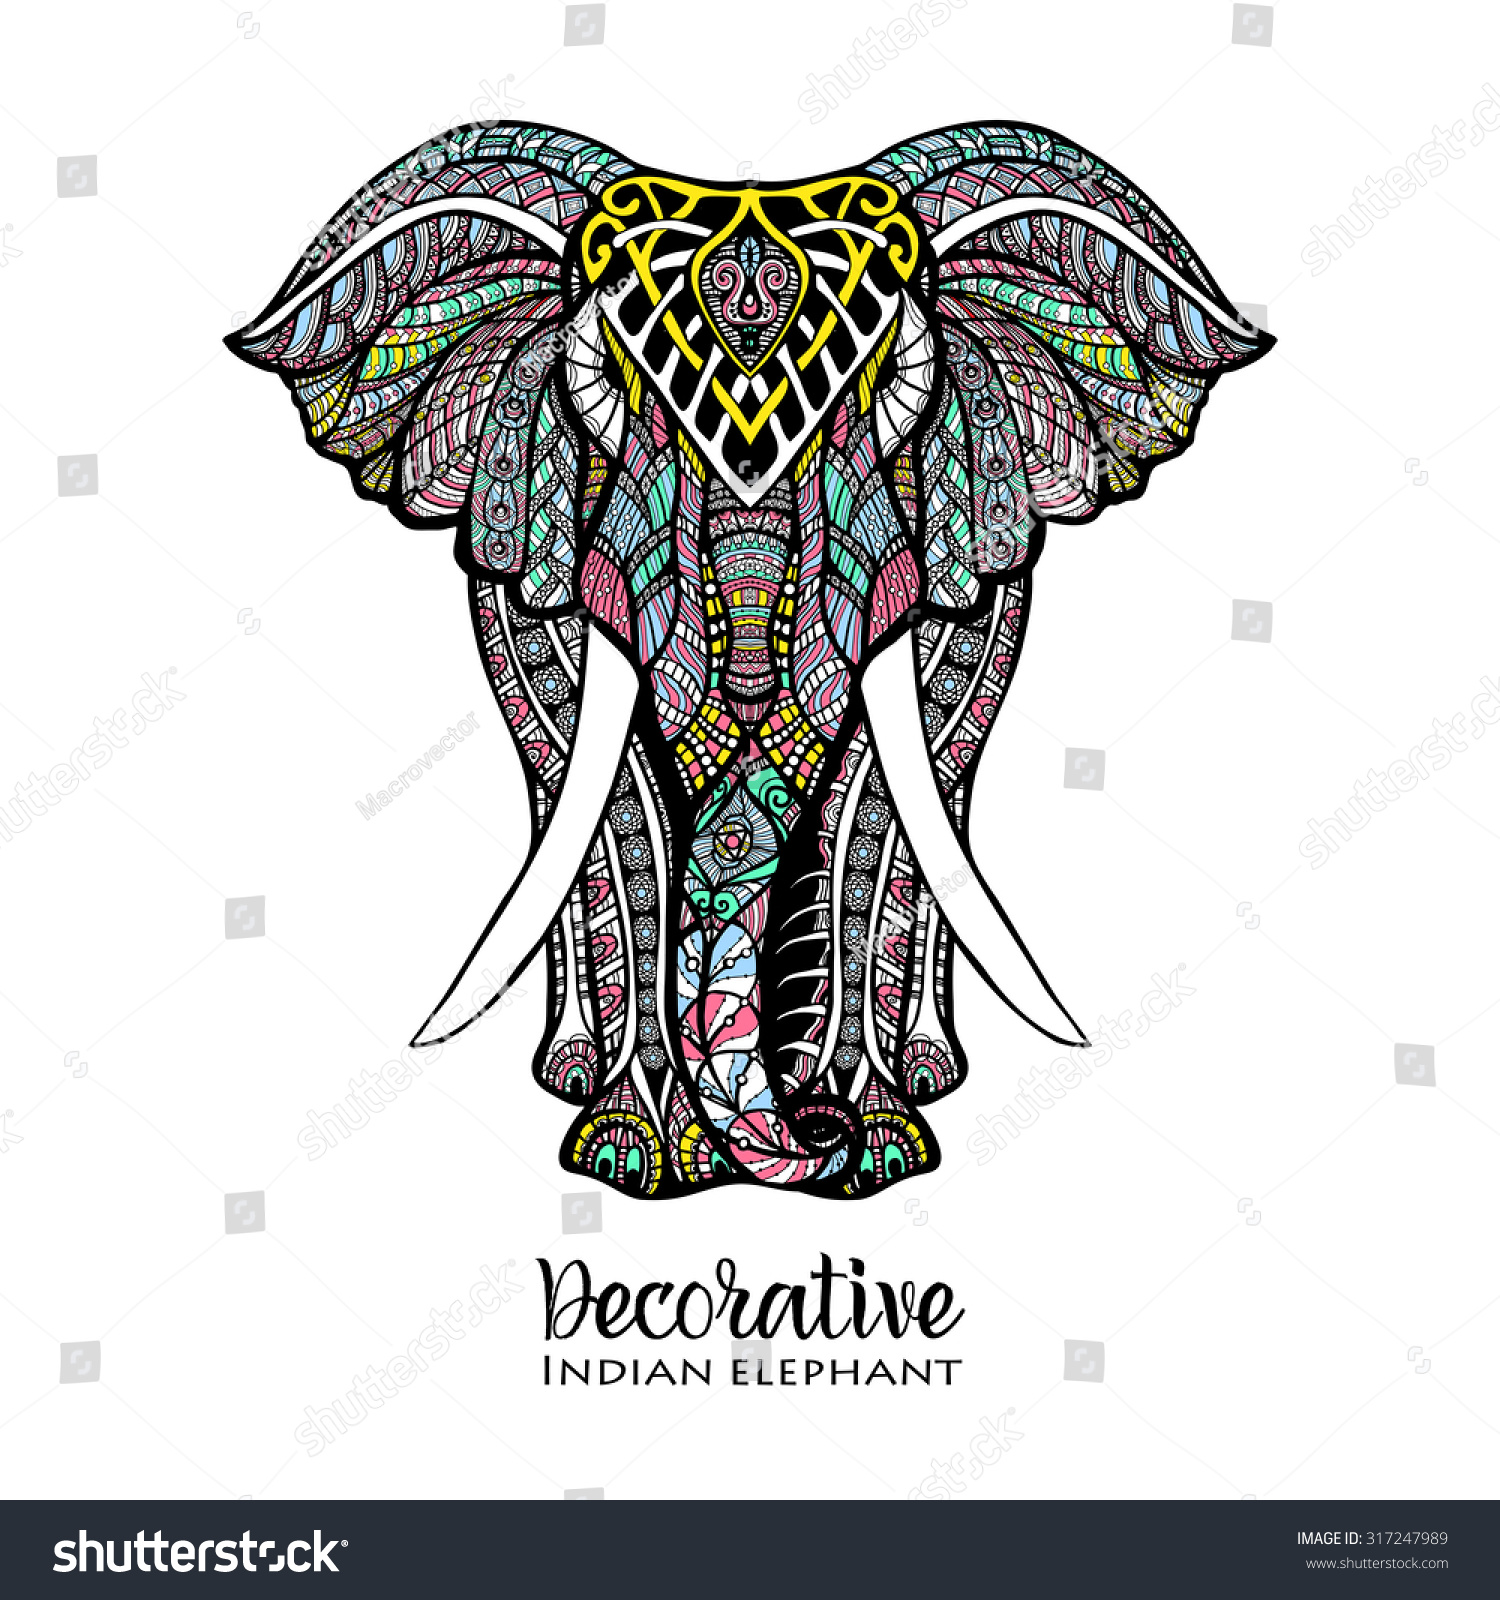 SVG of Hand drawn front view elephant with colored ornament vector illustration svg